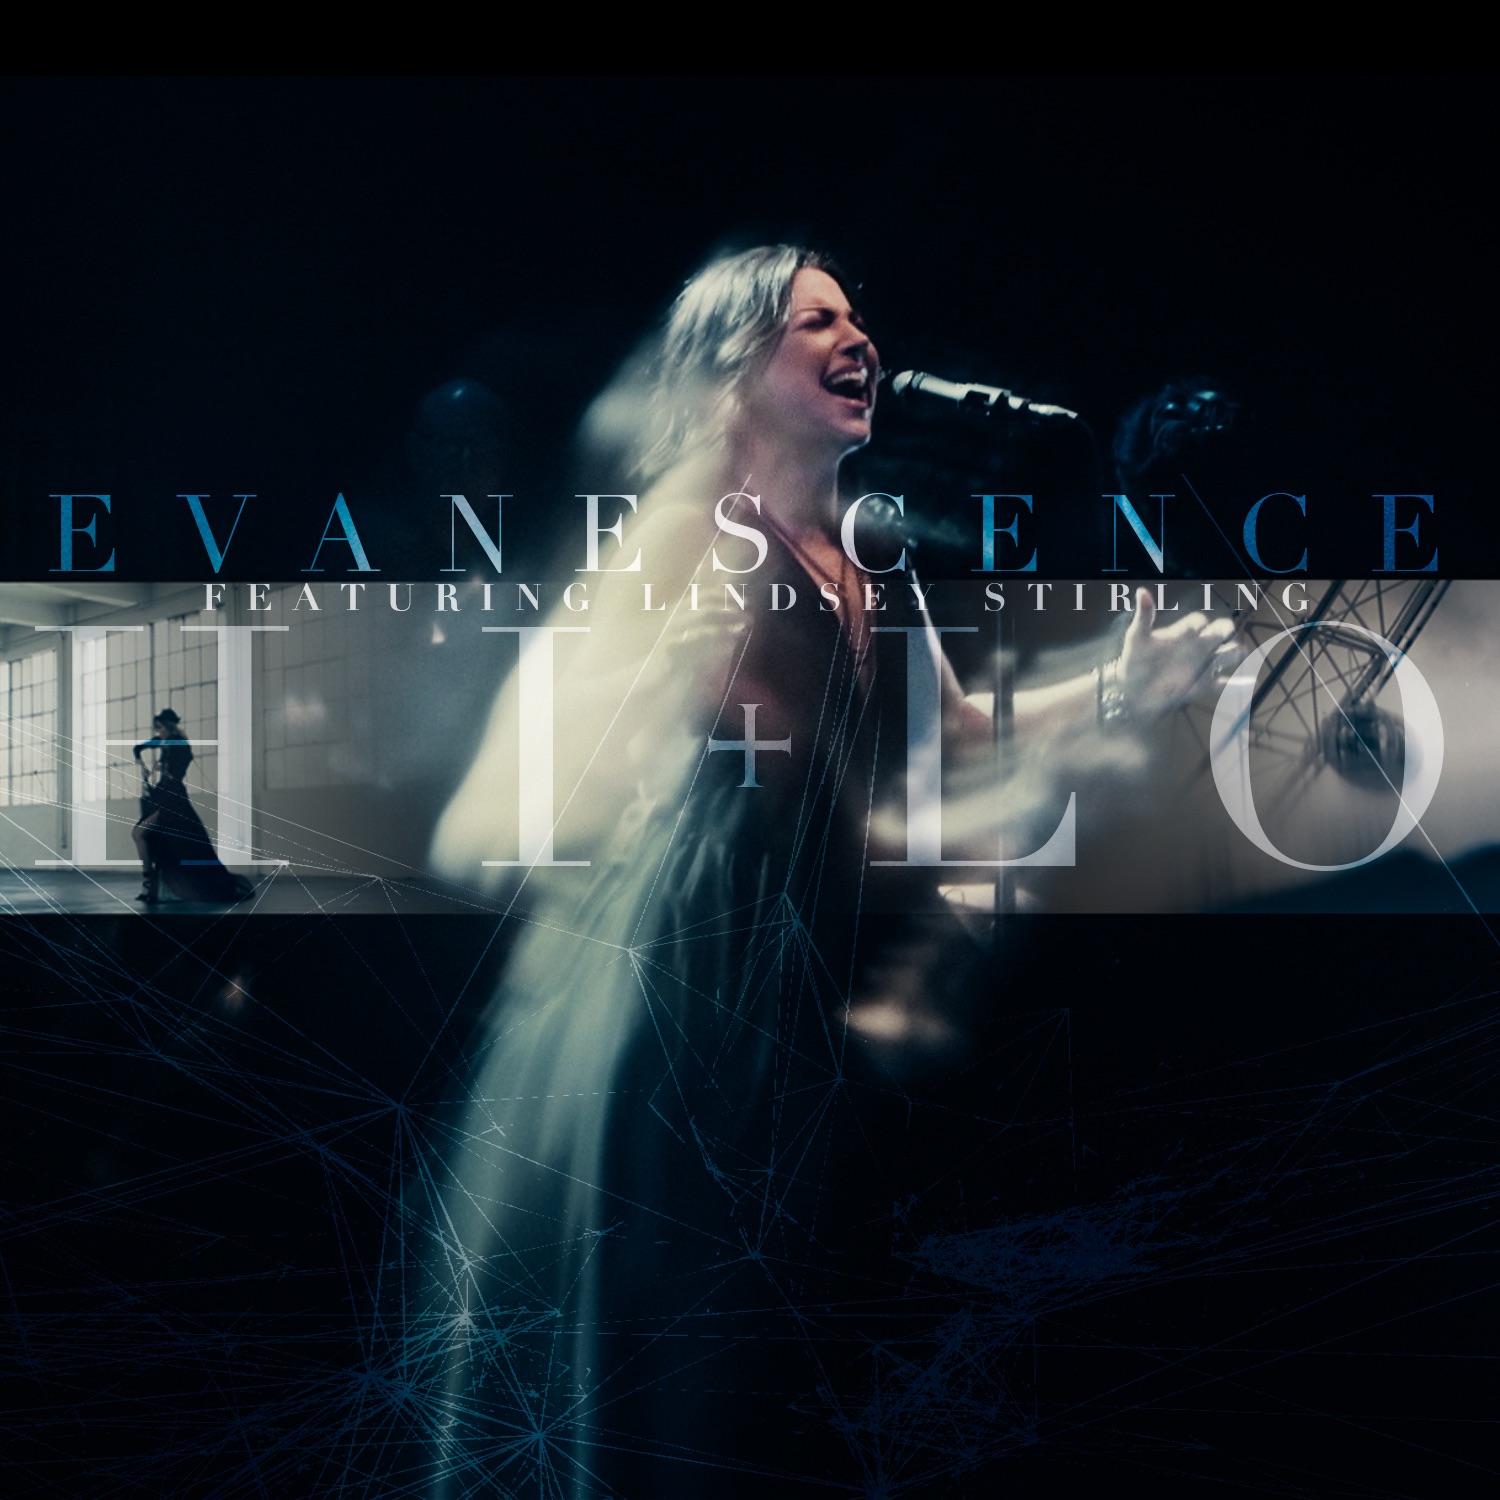 EVANESCENCE RELEASE OFFICIAL MUSIC VIDEO FOR LATEST SINGLE "HI-LO" FEATURING LINDSEY STIRLING